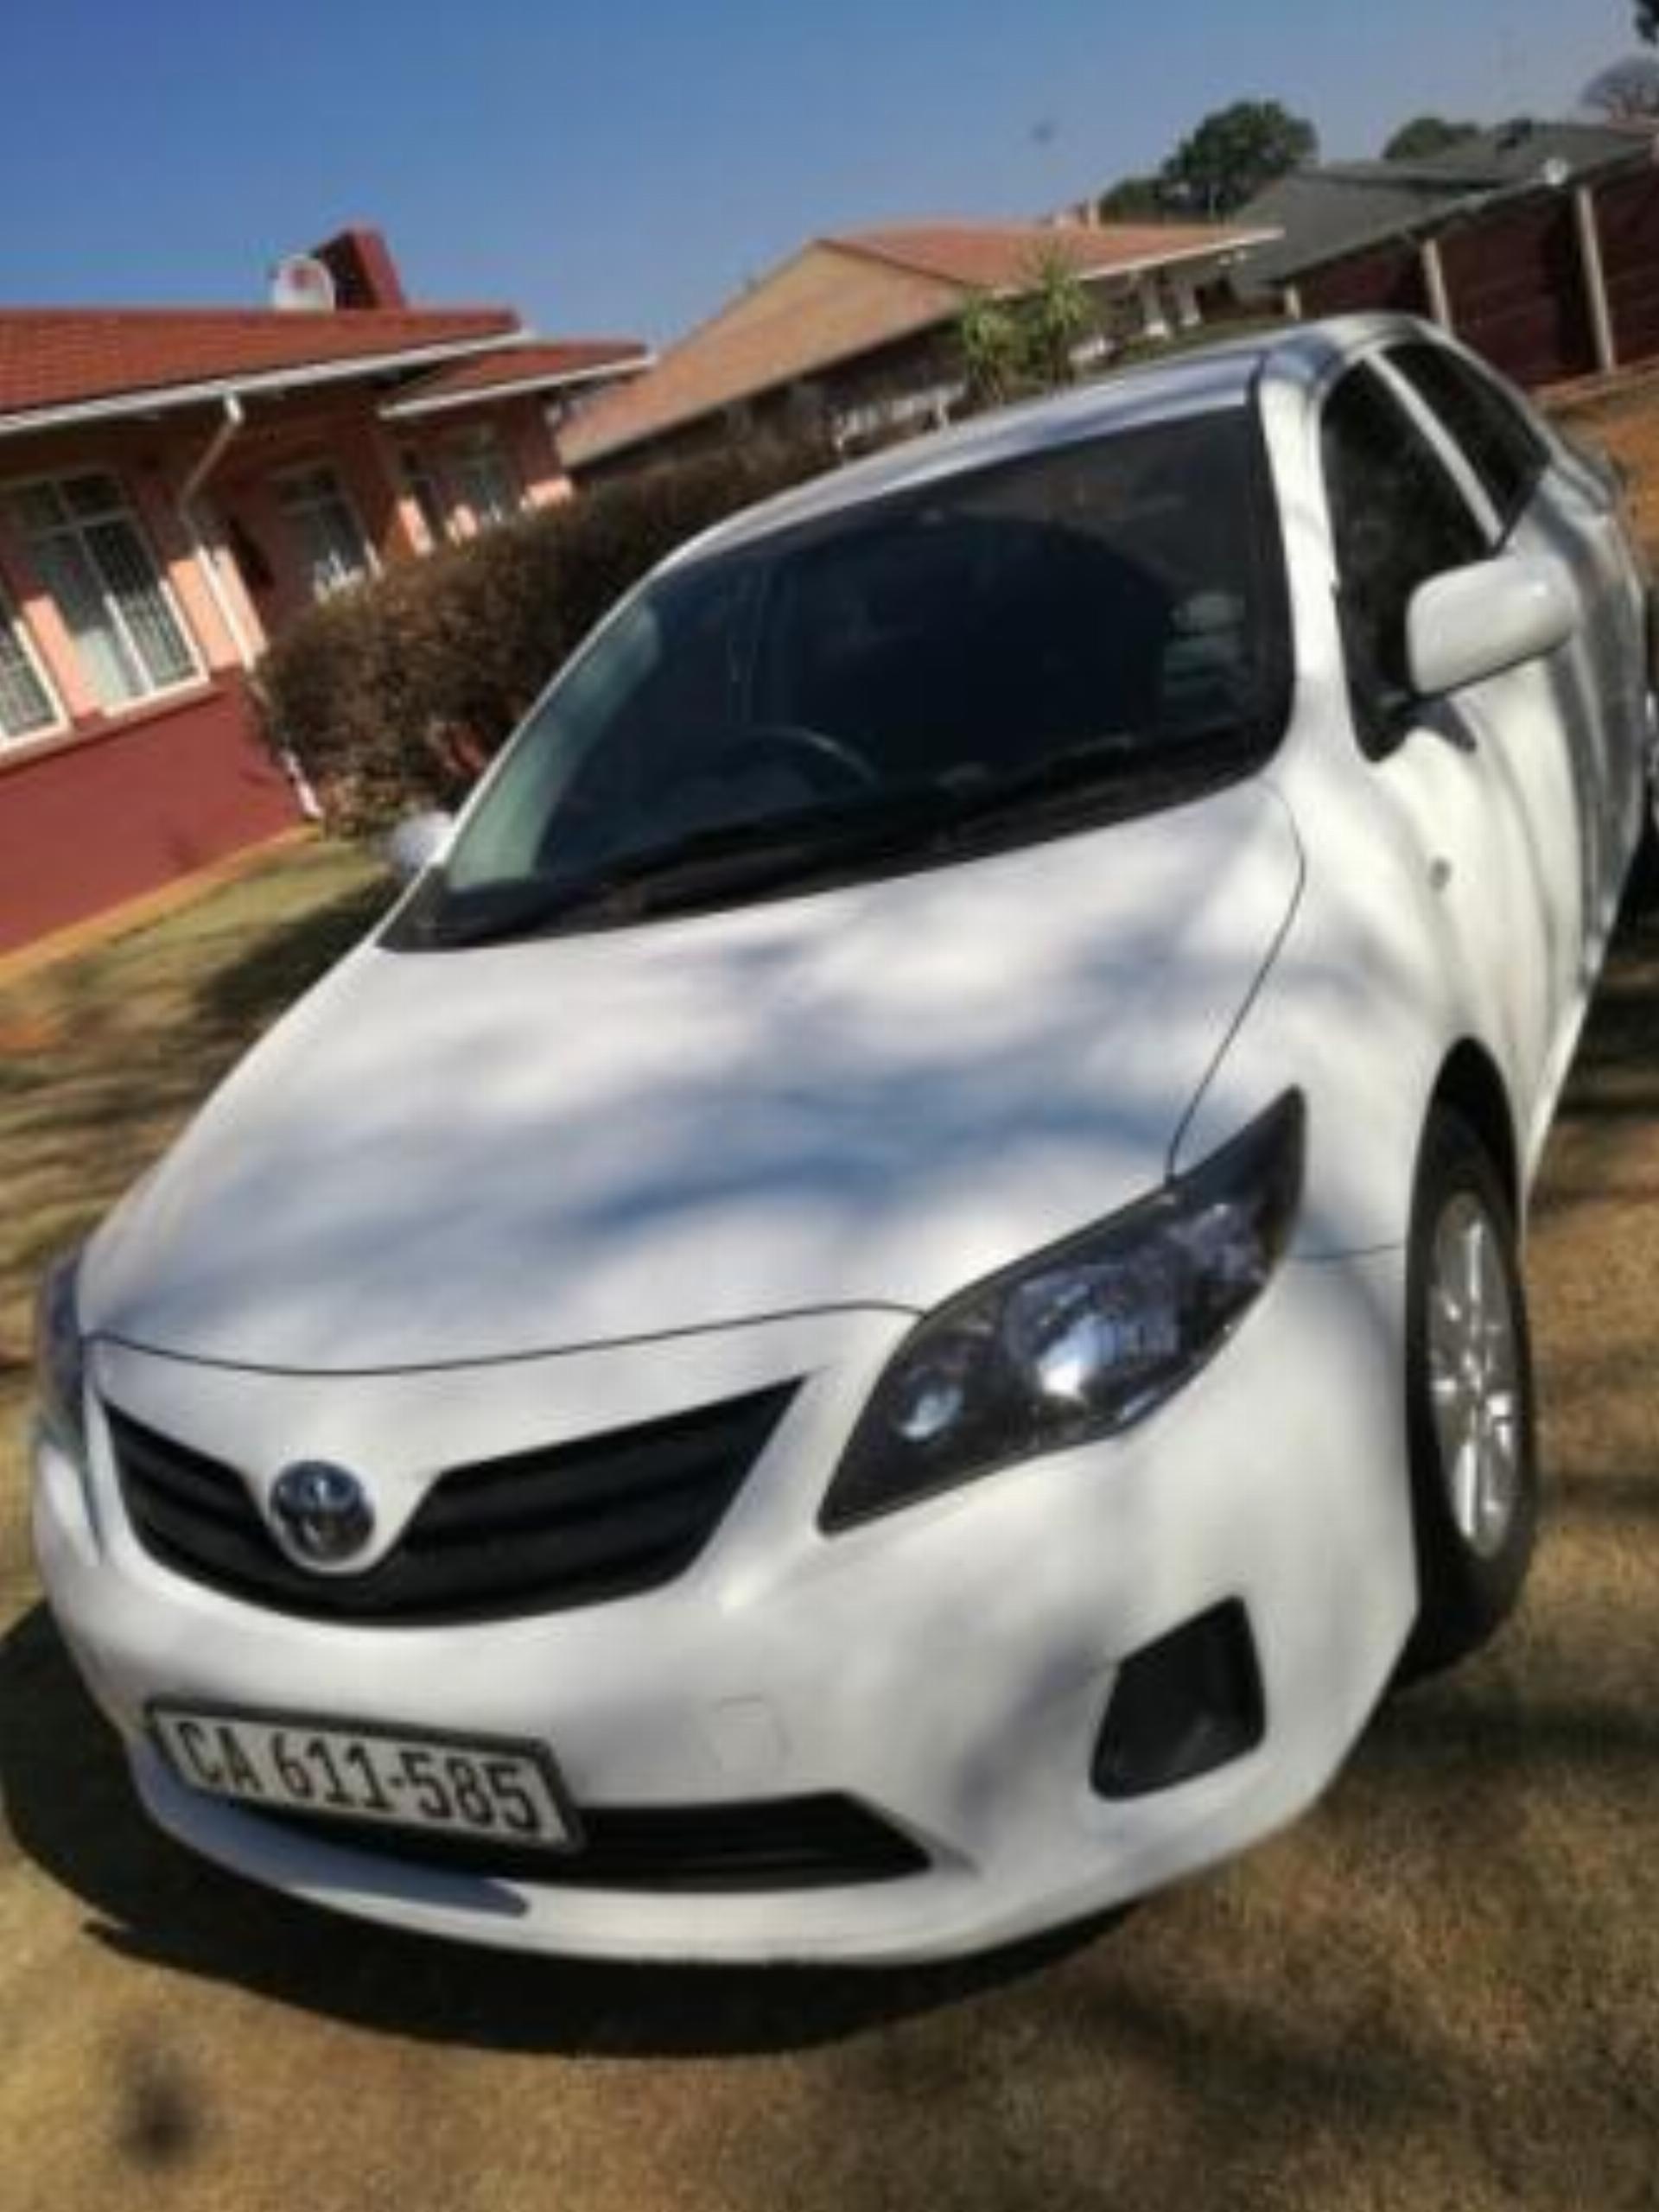 Toyota Corolla 1.6 White Sedan With Mags And Airbgs